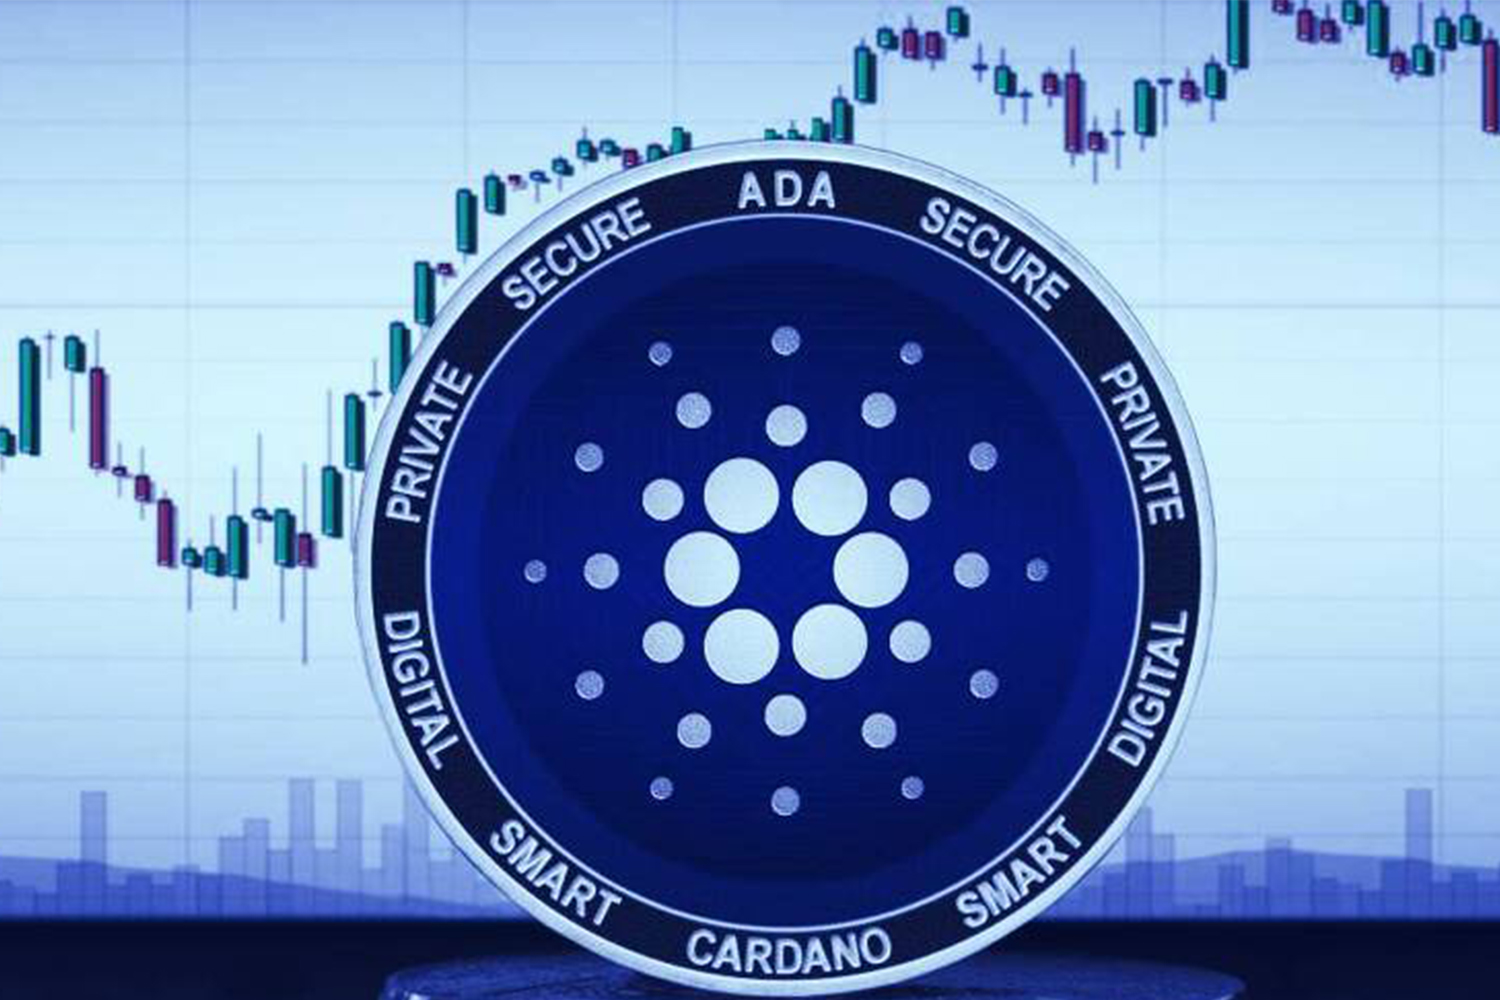 Cardano (ADA) has become one of the fastest-growing cryptocurrency's